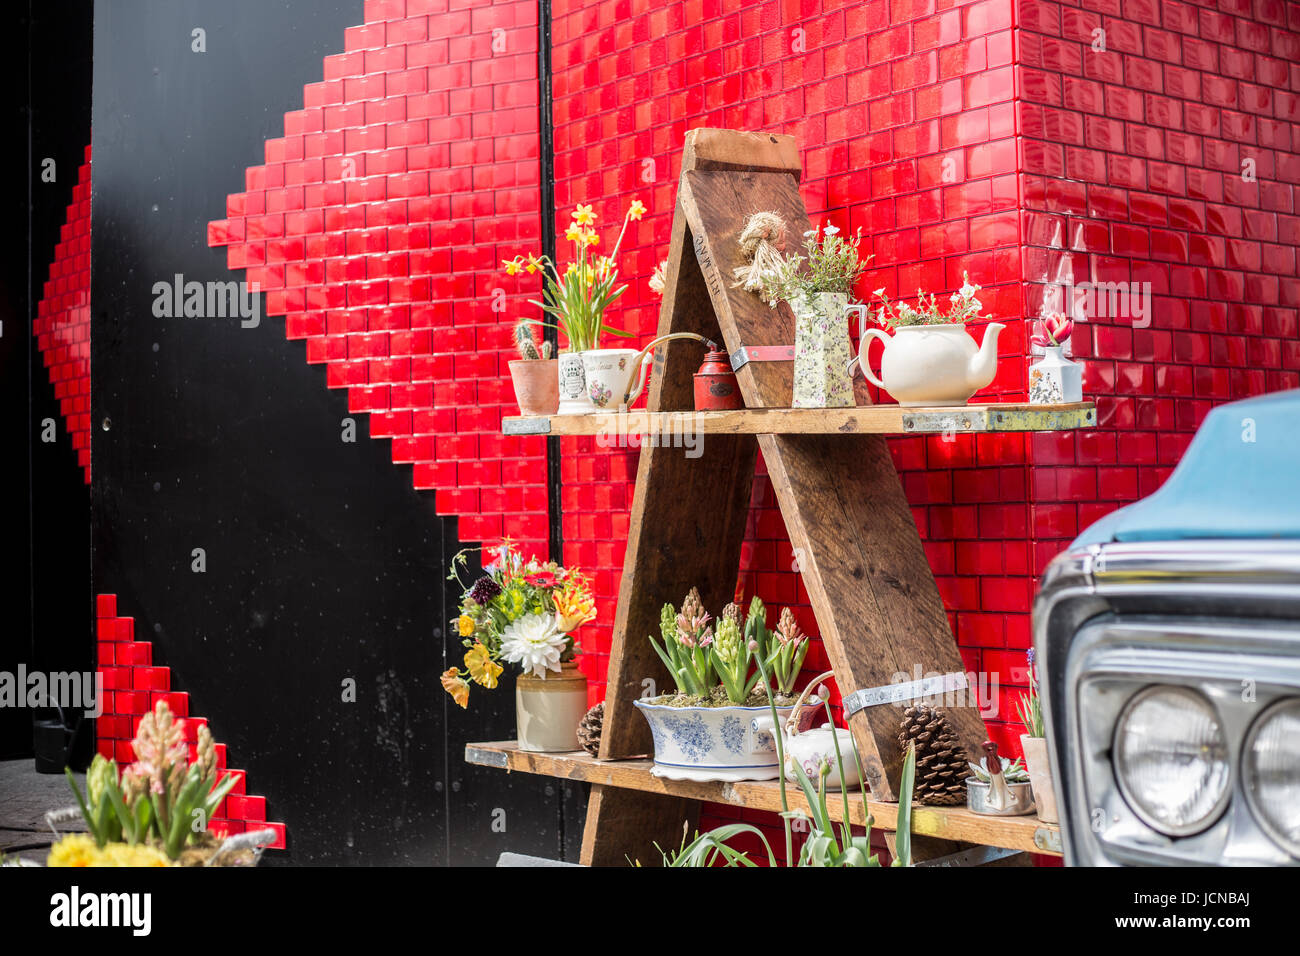 Red wall at vintage market, London. Stock Photo